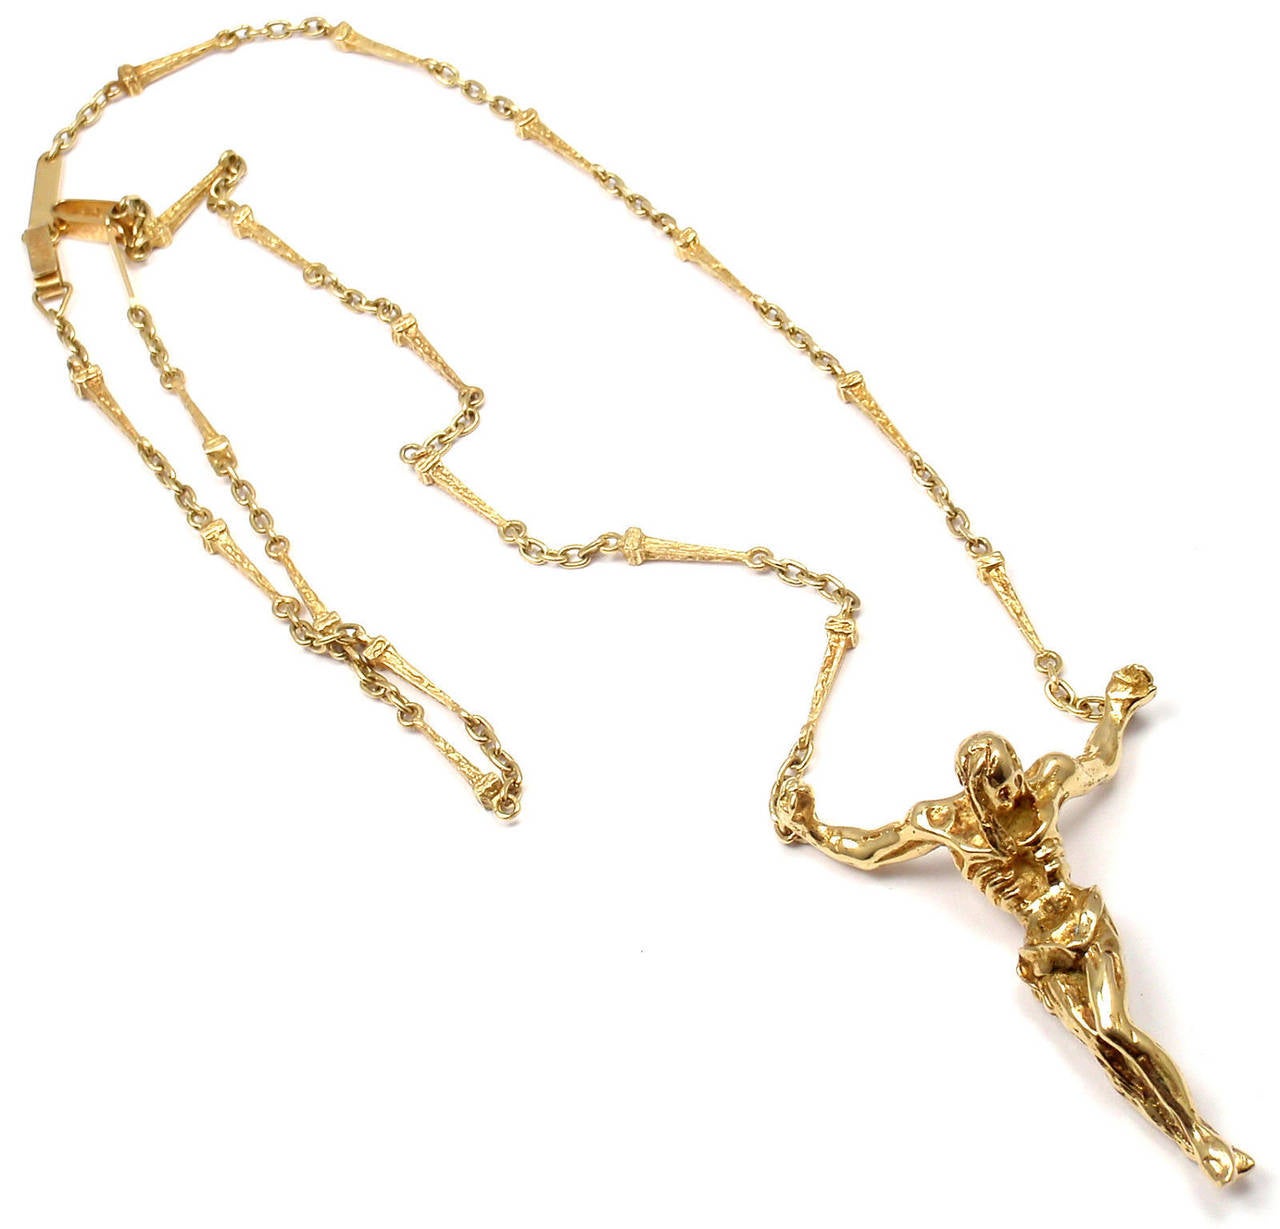 Limited Edition 18k Yellow Gold Salvador Dali Large Christ Saint John On The Cross Bracelet Necklace Set. 
This is a limited edition numbered piece from 1970's, number 104 out of 1000 ever made.
Accompanying card from Exmundart.

Details: